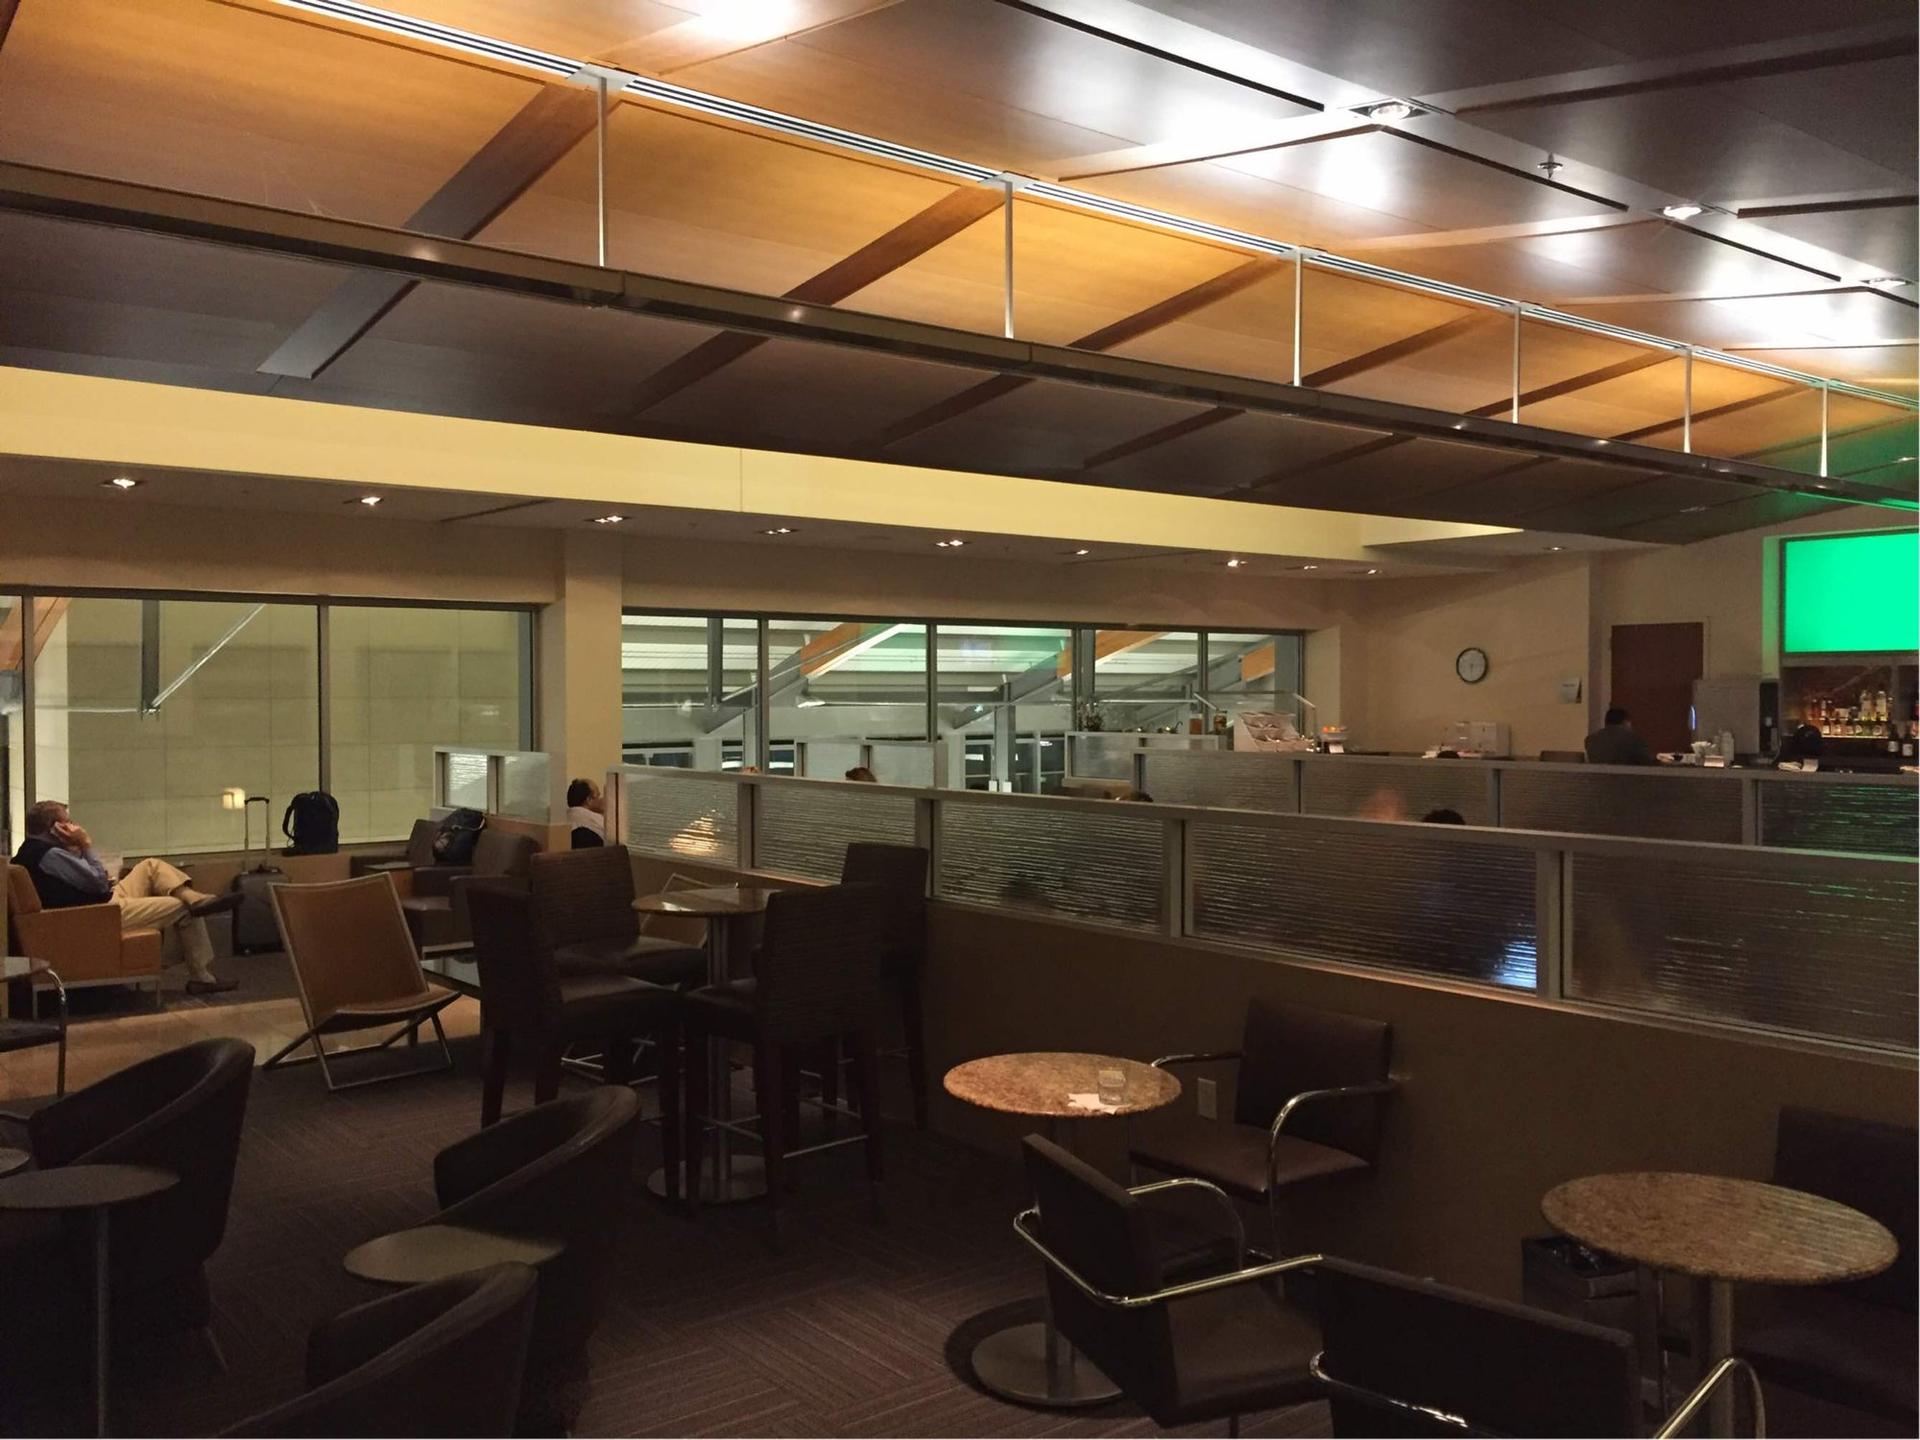 American Airlines Admirals Club image 20 of 31